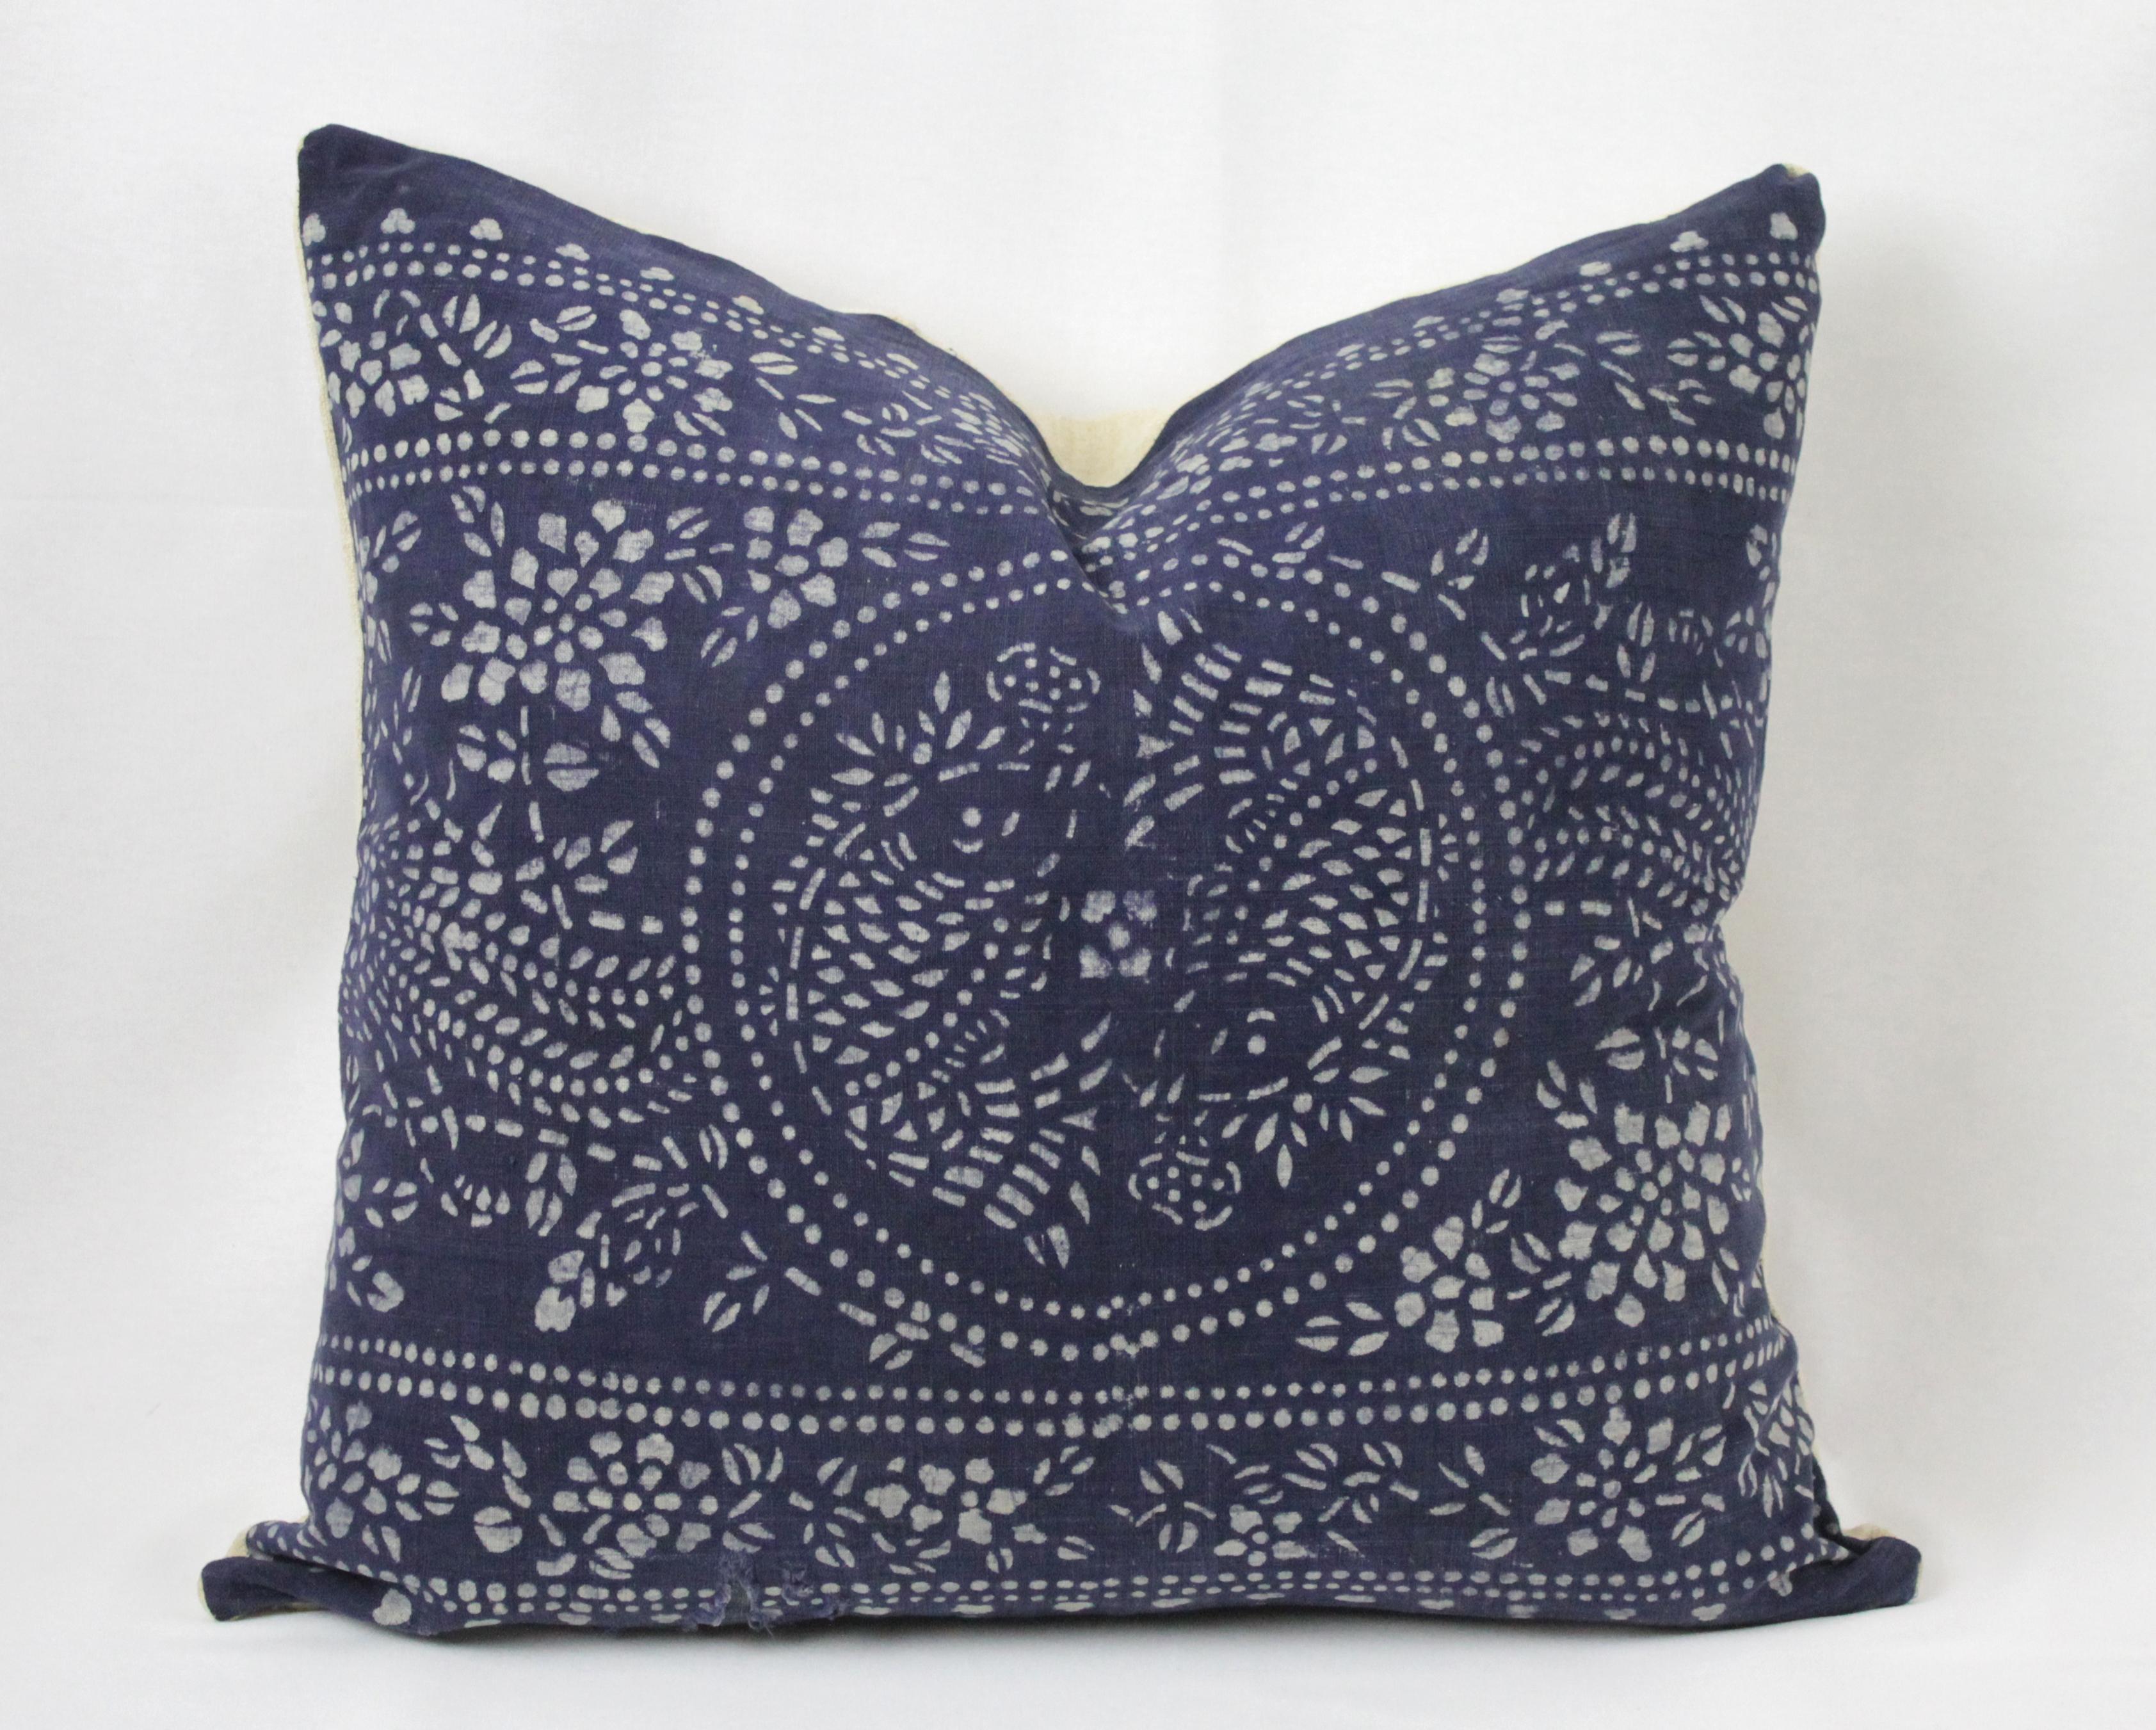 Beautiful vintage indigo dotted printed pillow. Back is in antique French grain sack linen. Main color is indigo with off-white dots that create a pattern. Pillow has minor tear on the bottom left that is stitched around and a patch on the back